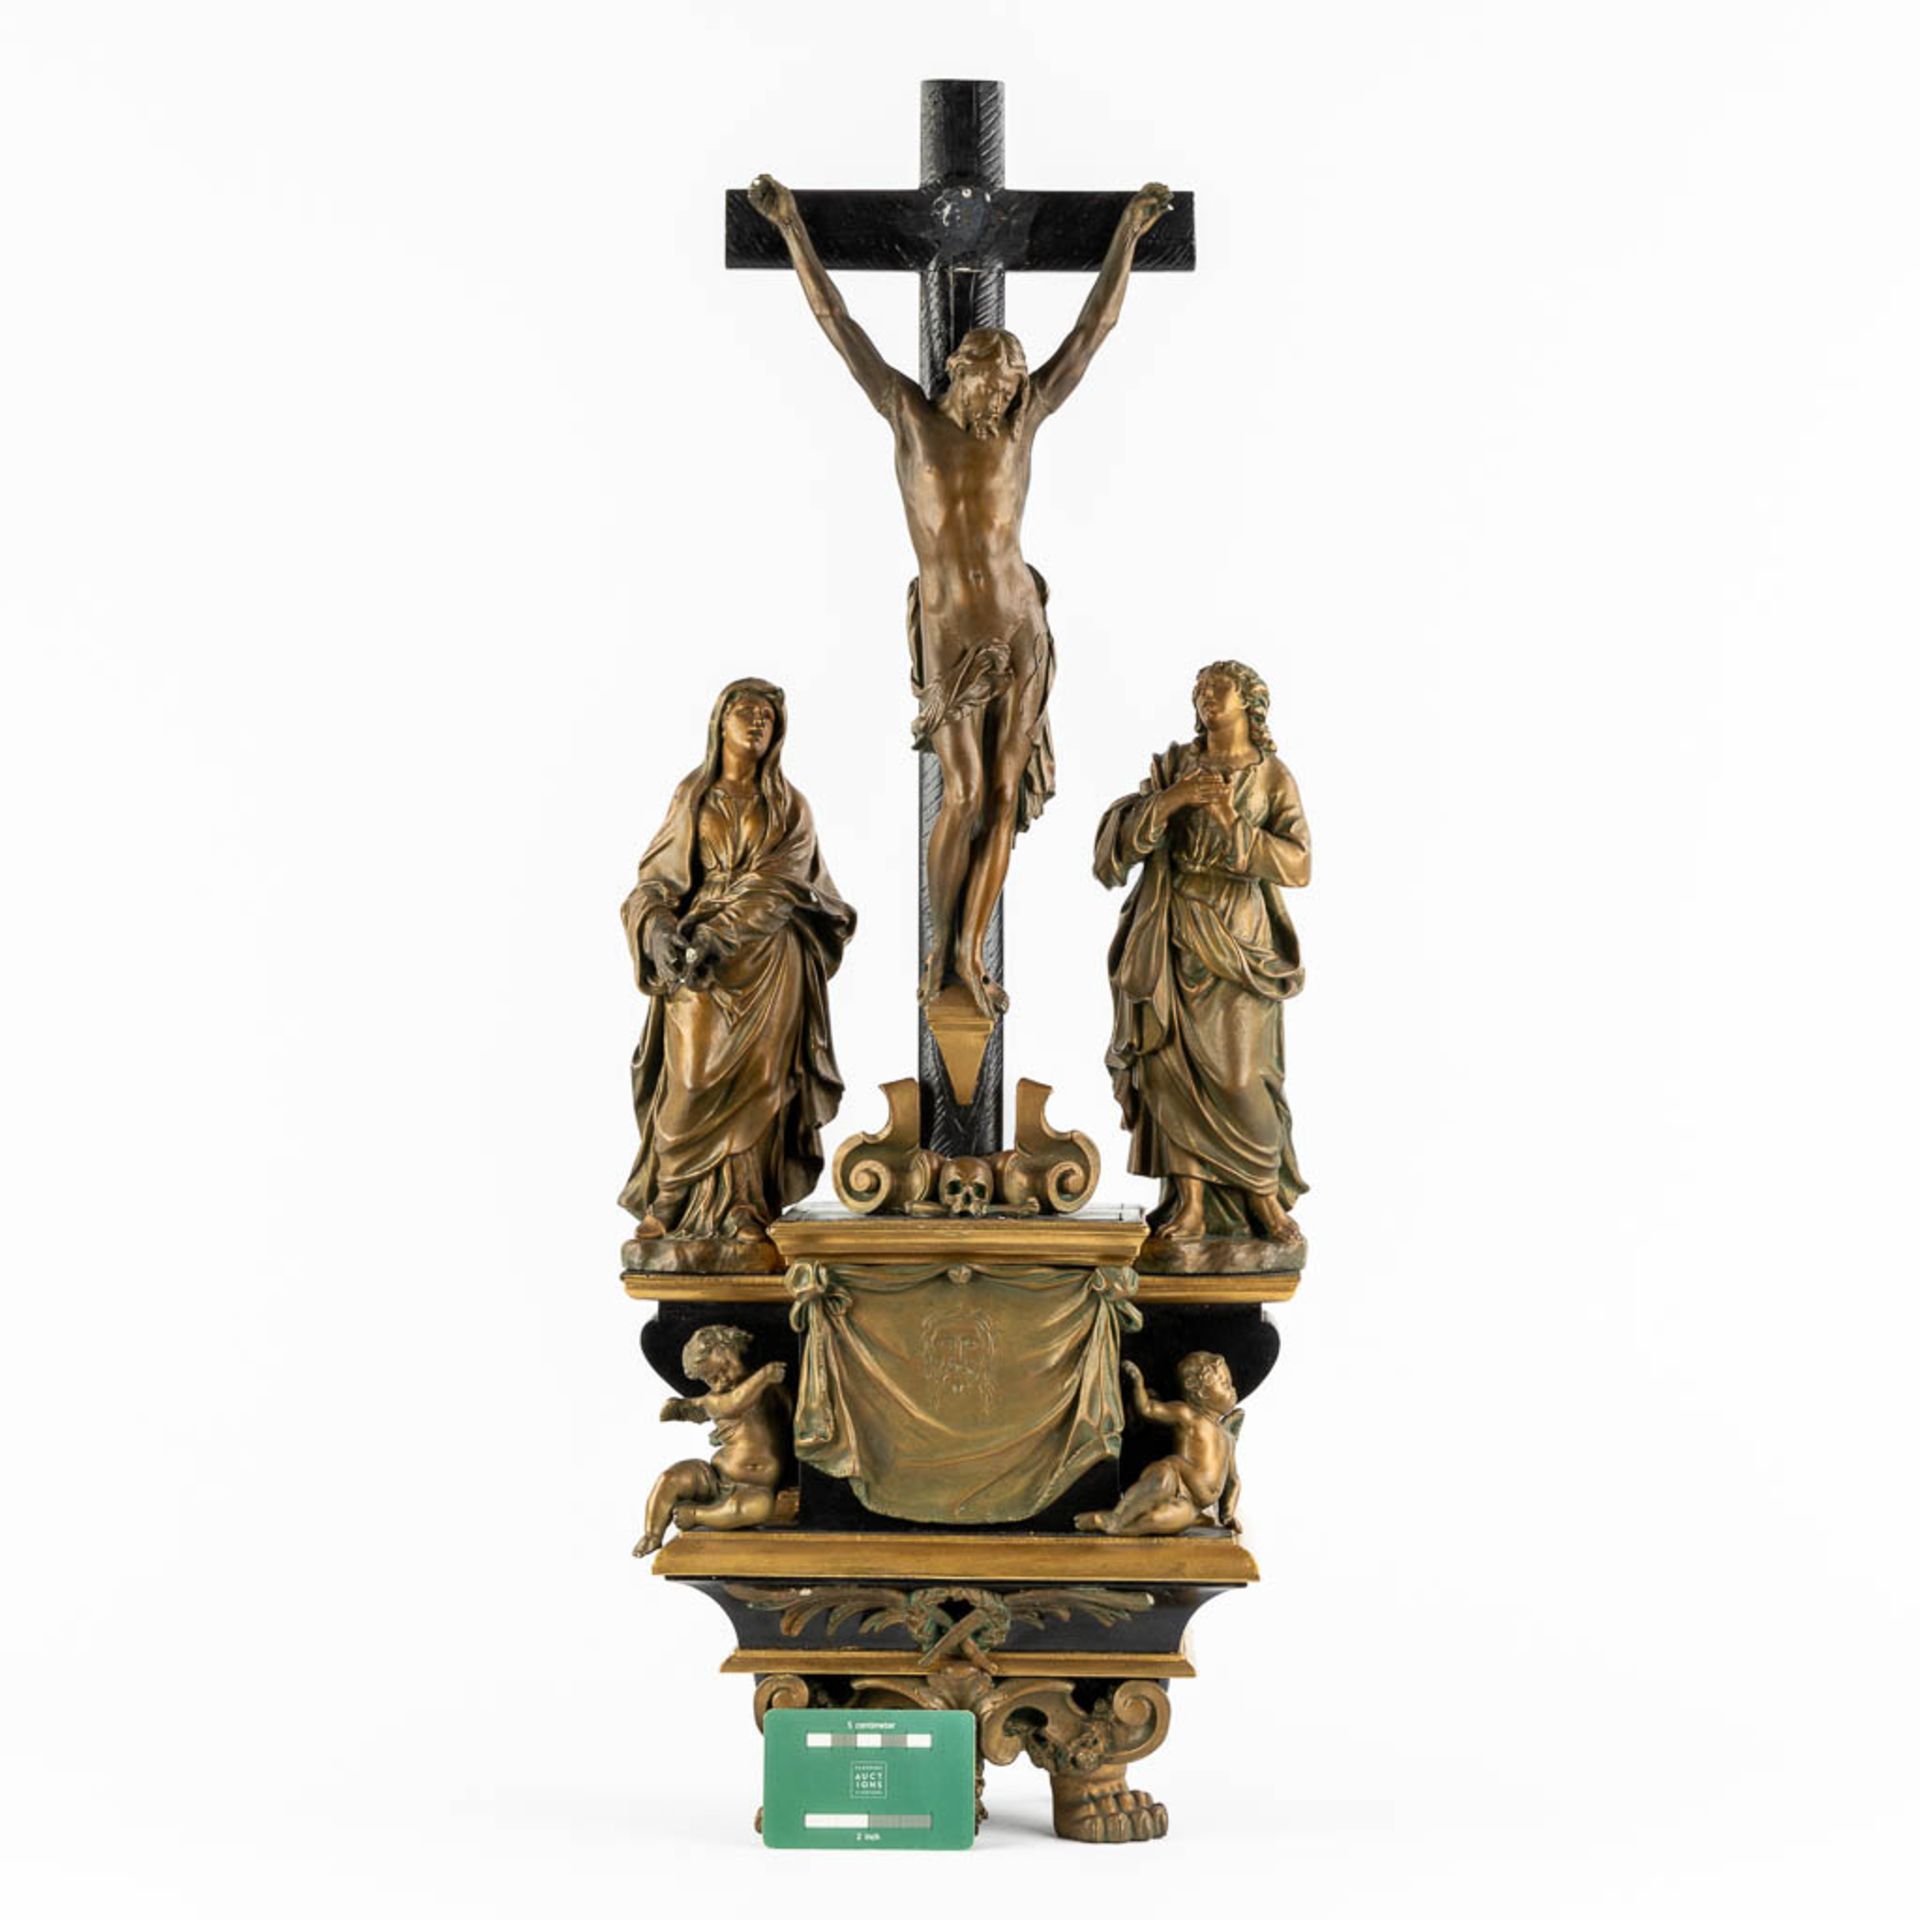 A large crucifix with a 3-piece golgotha, Veil of Veronica, patinated white clay. Circa 1900. (L:16 - Image 2 of 18